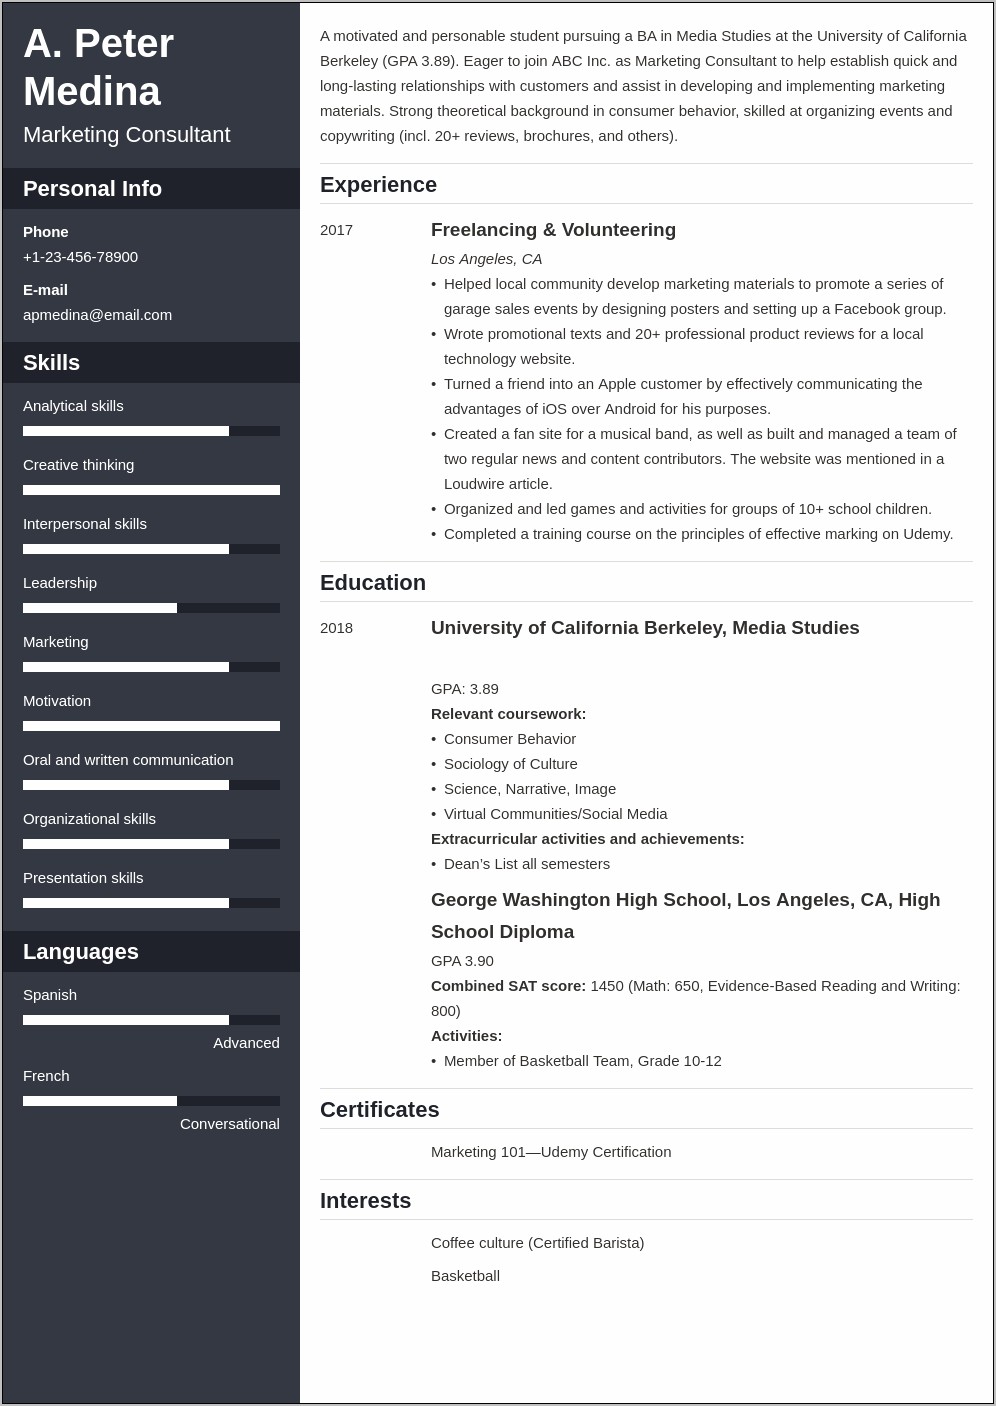 resume-for-undergraduate-student-with-no-work-experience-resume